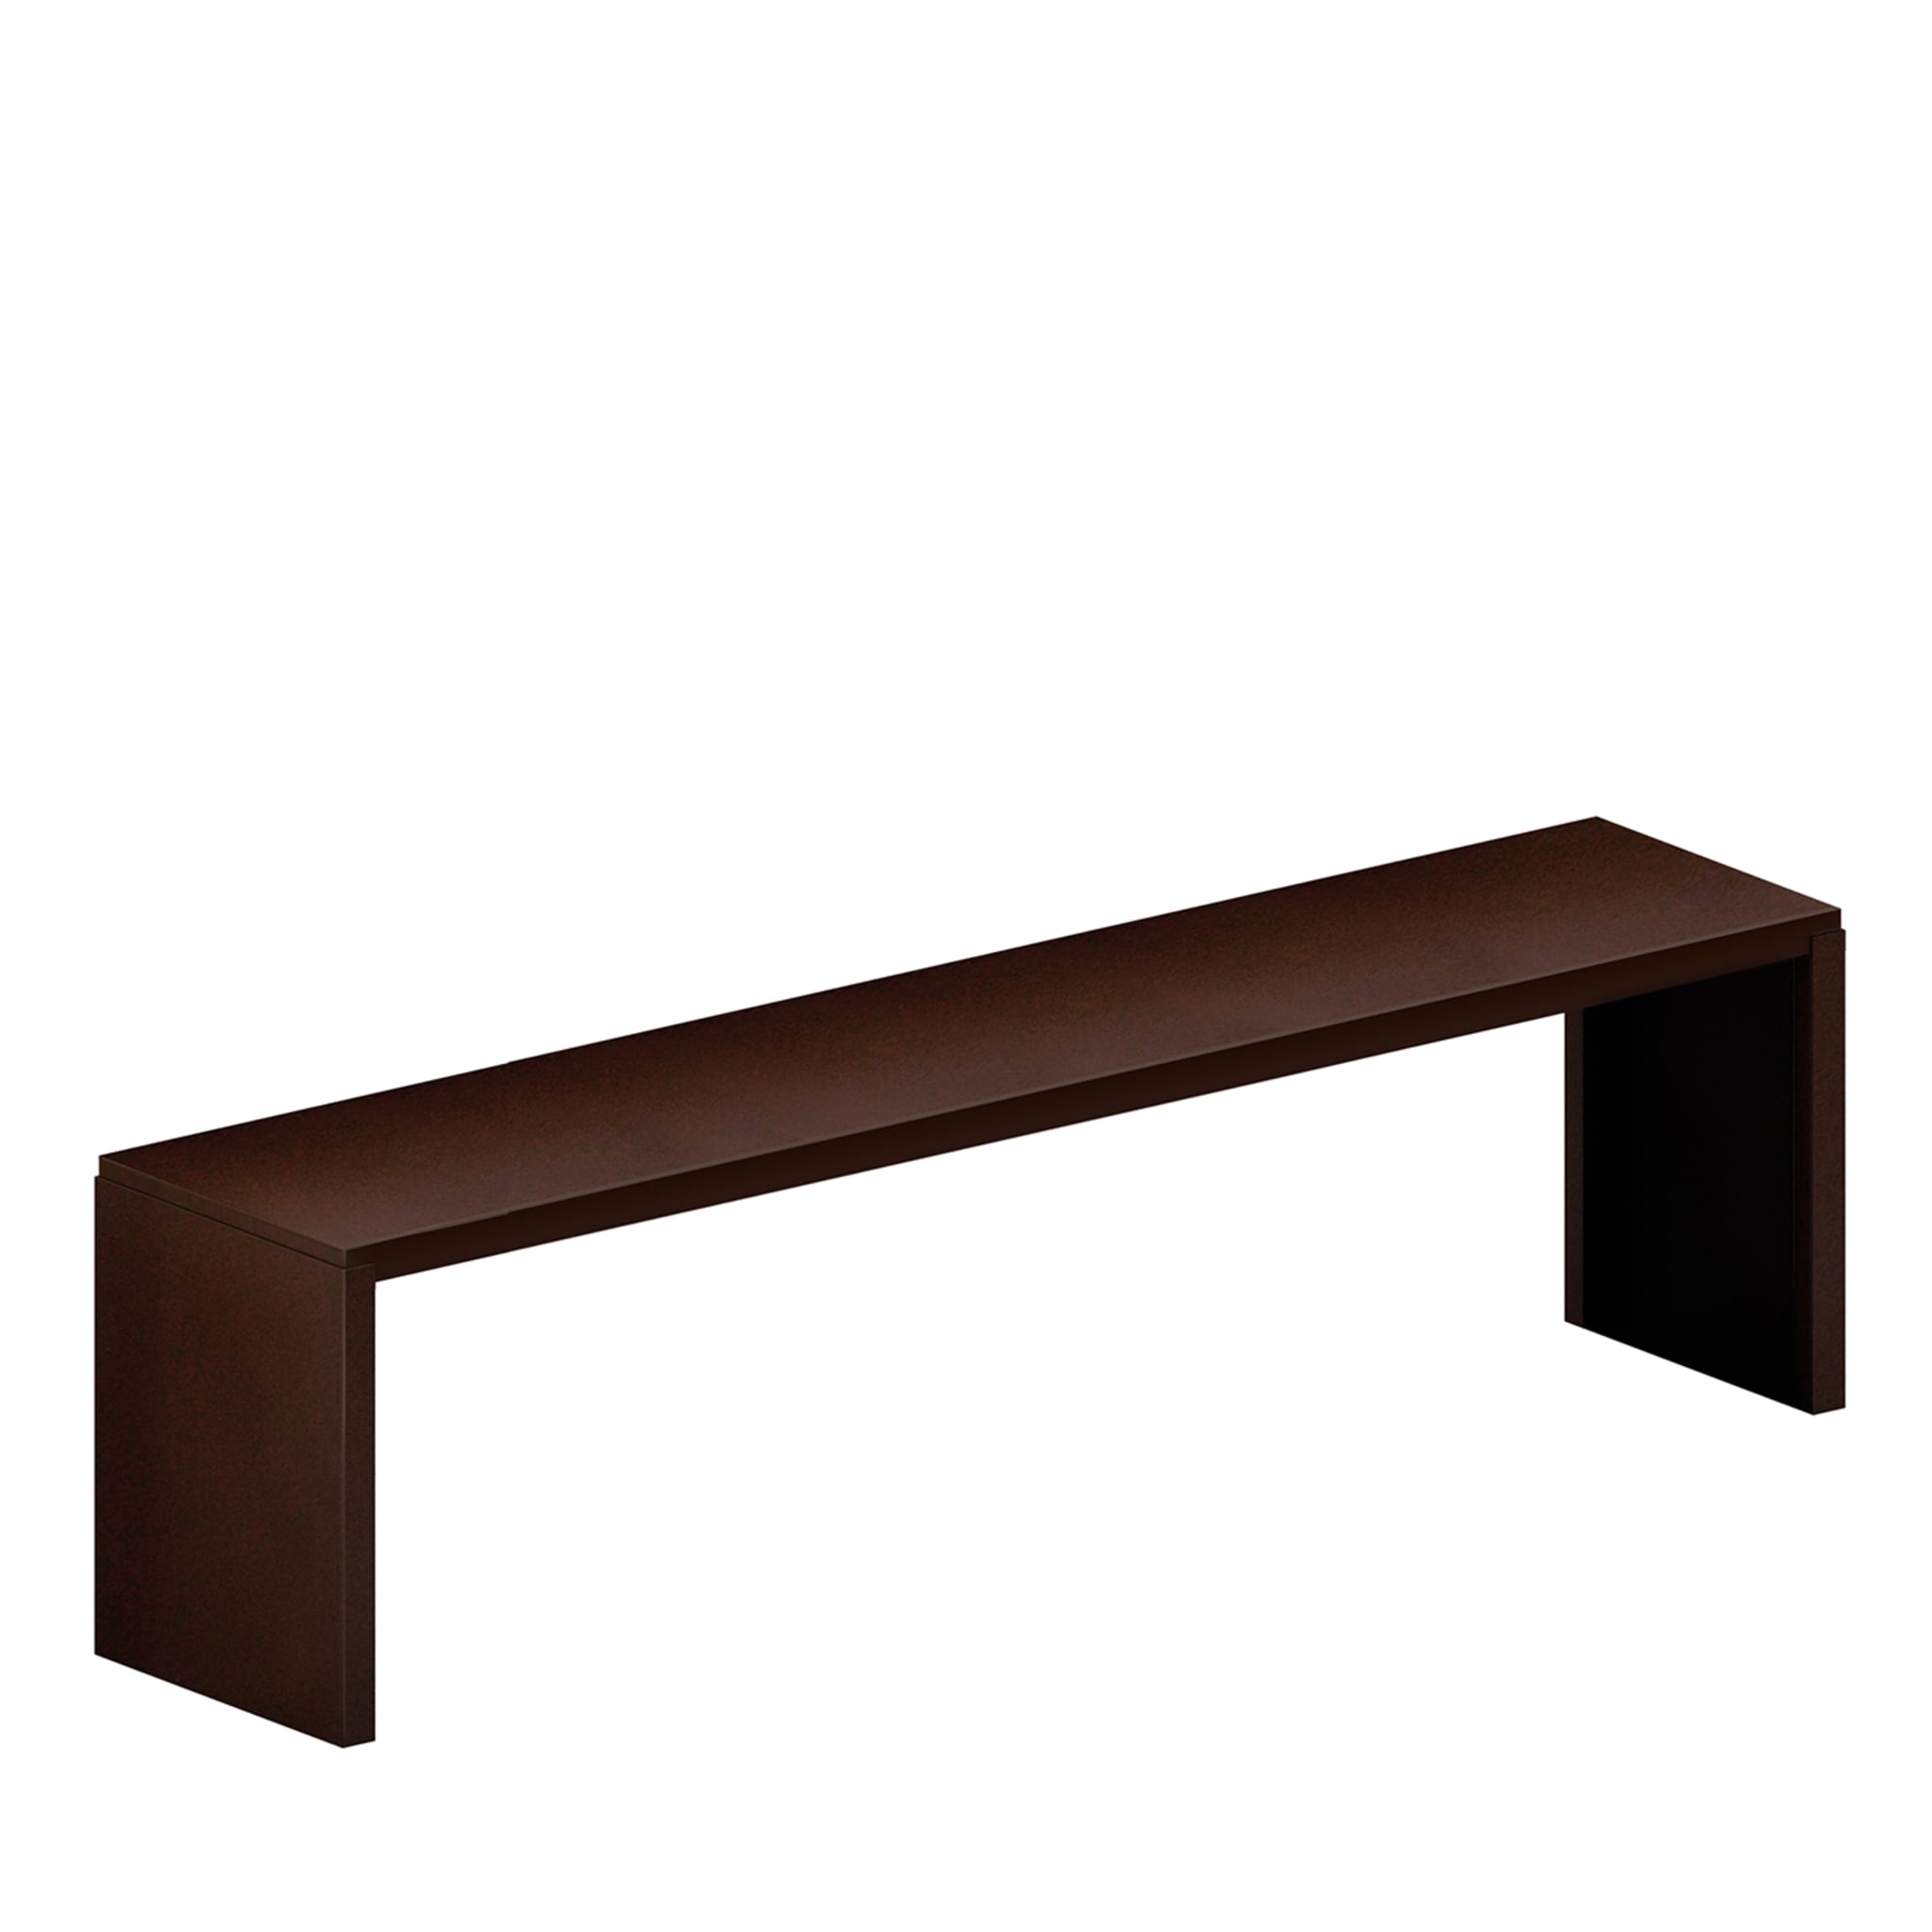 Big Irony Brown Outdoor Bench by Maurizio Peregalli - Main view